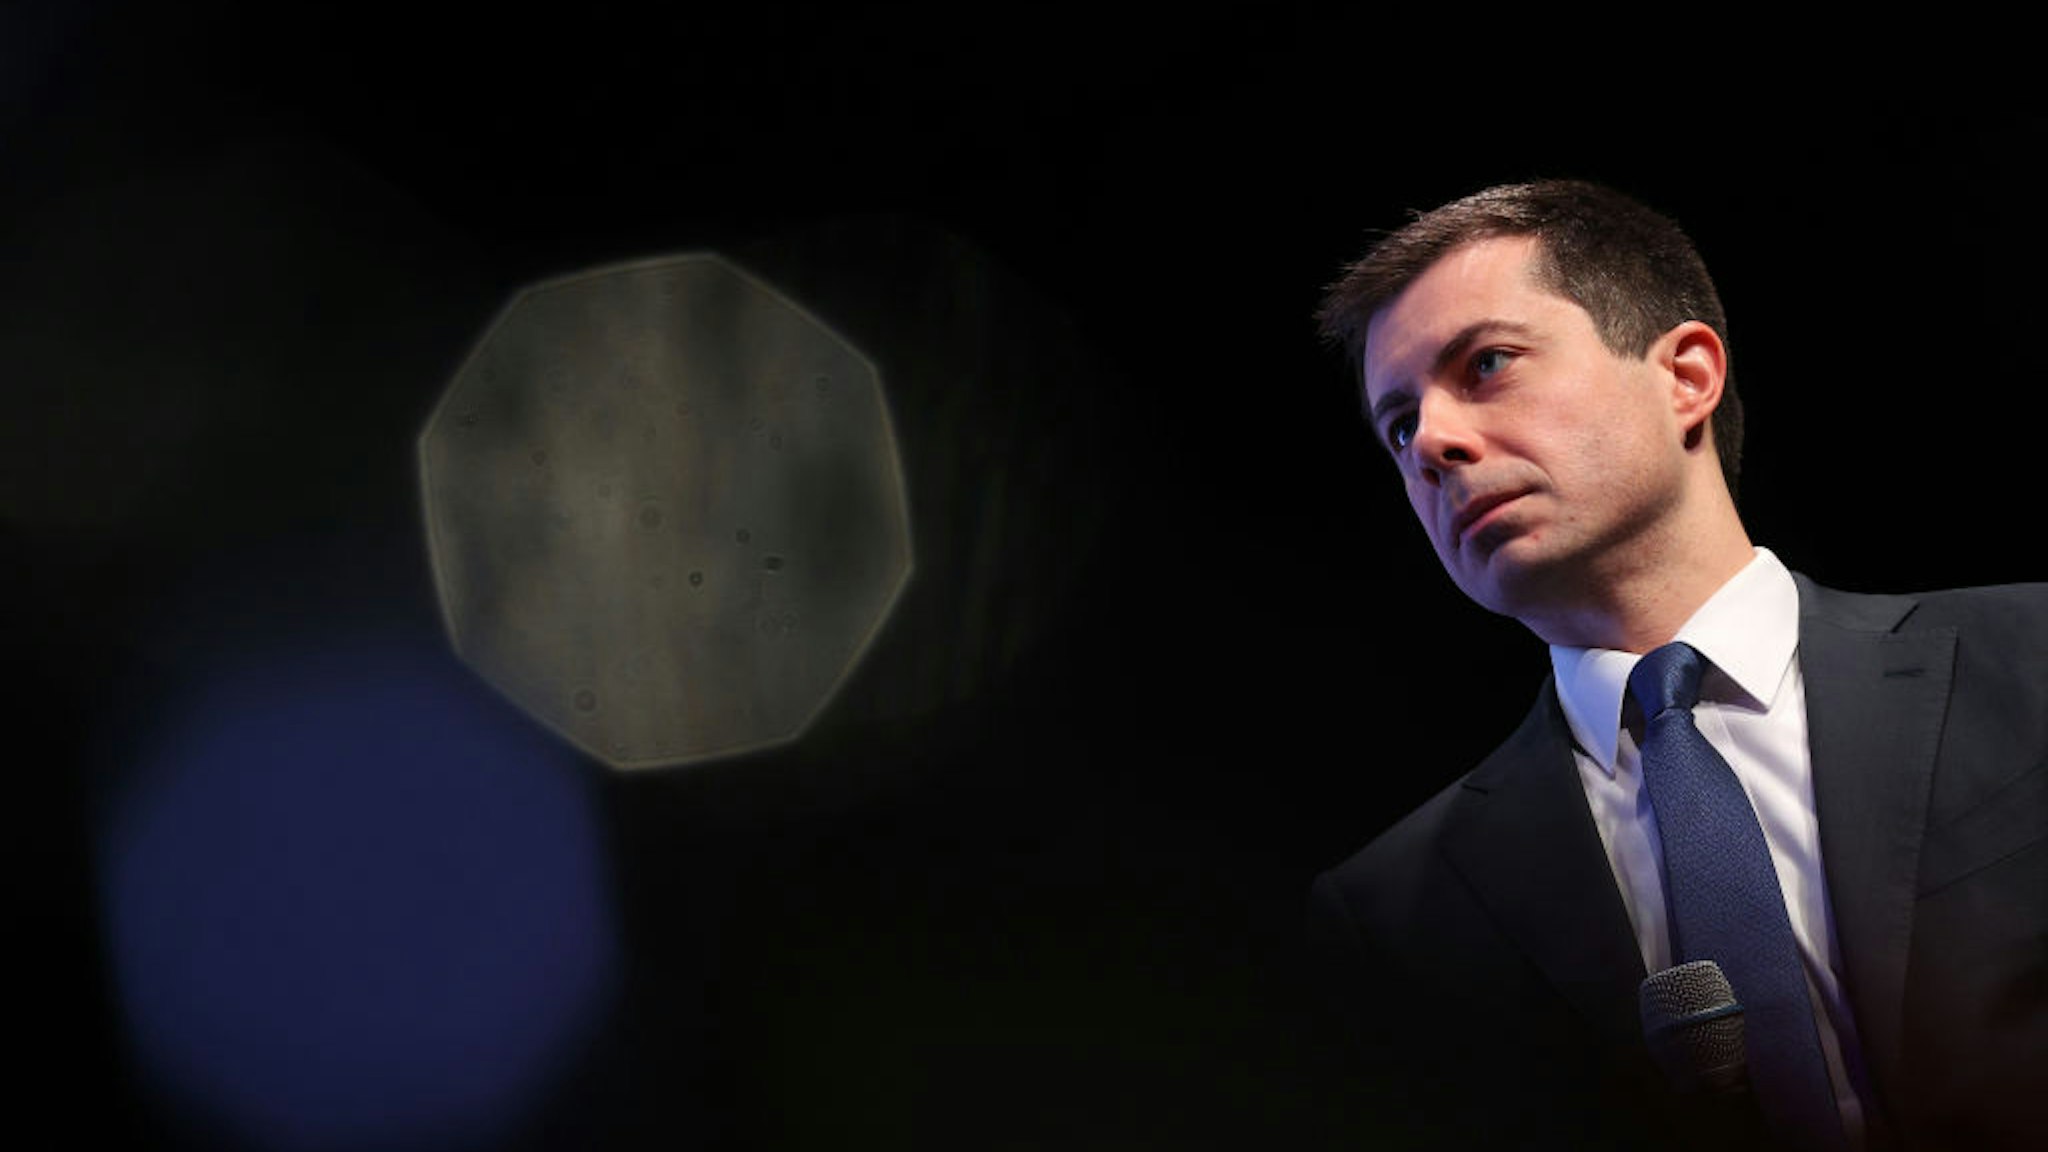 Democratic presidential candidate former South Bend, Indiana Mayor Pete Buttigieg answers questions from college students while appearing at the New Hampshire Youth Climate and Clean Energy Town Hall February 05, 2020 in Concord, New Hampshire.